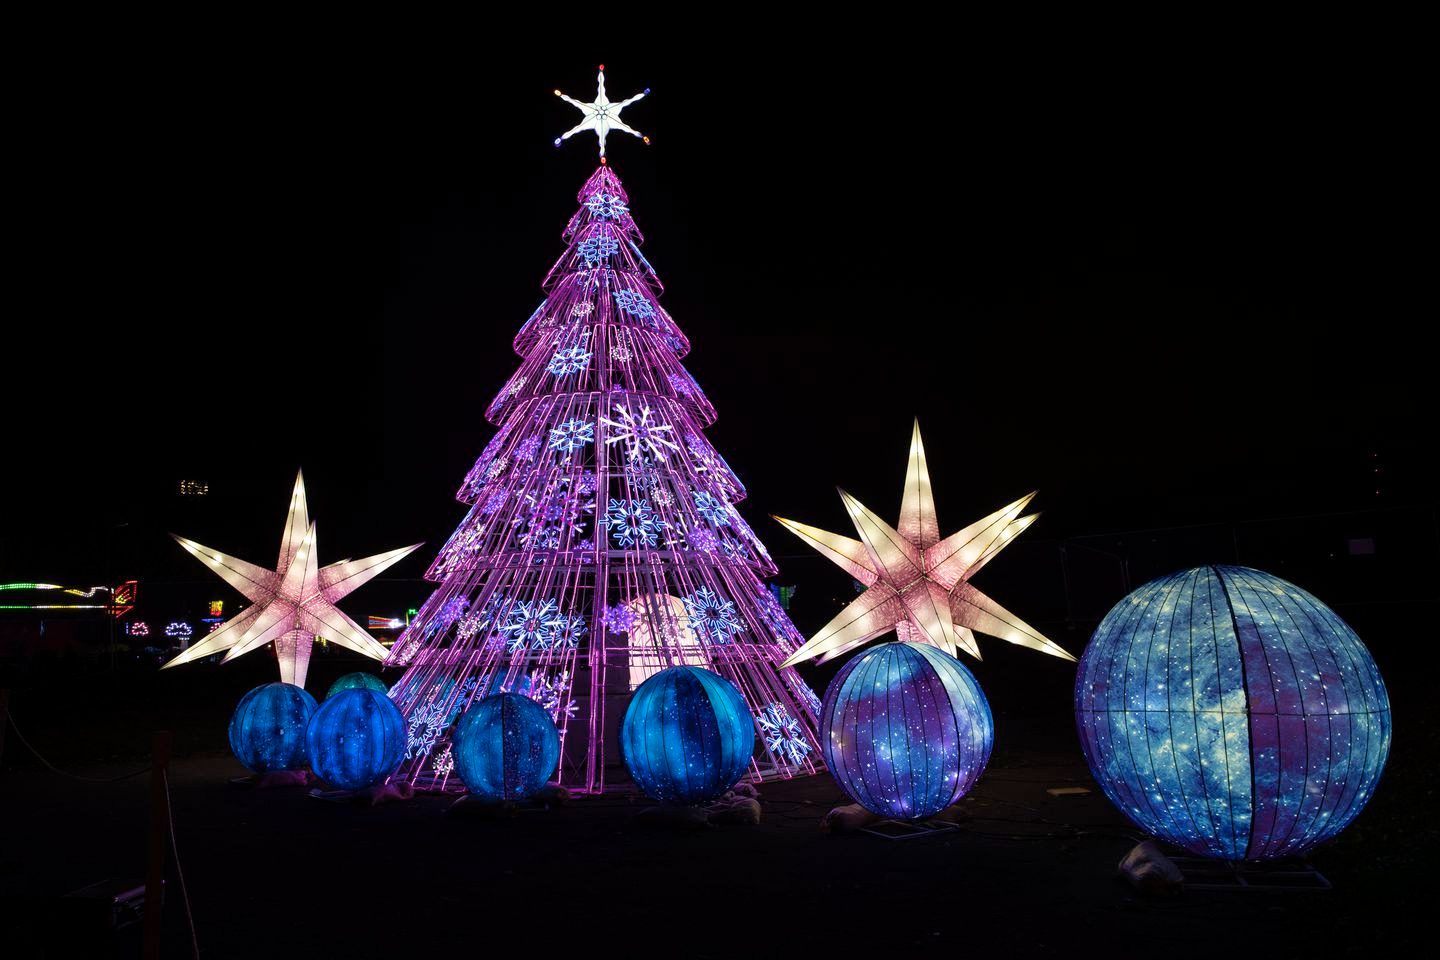 A luminous Christmas tree and decorations.